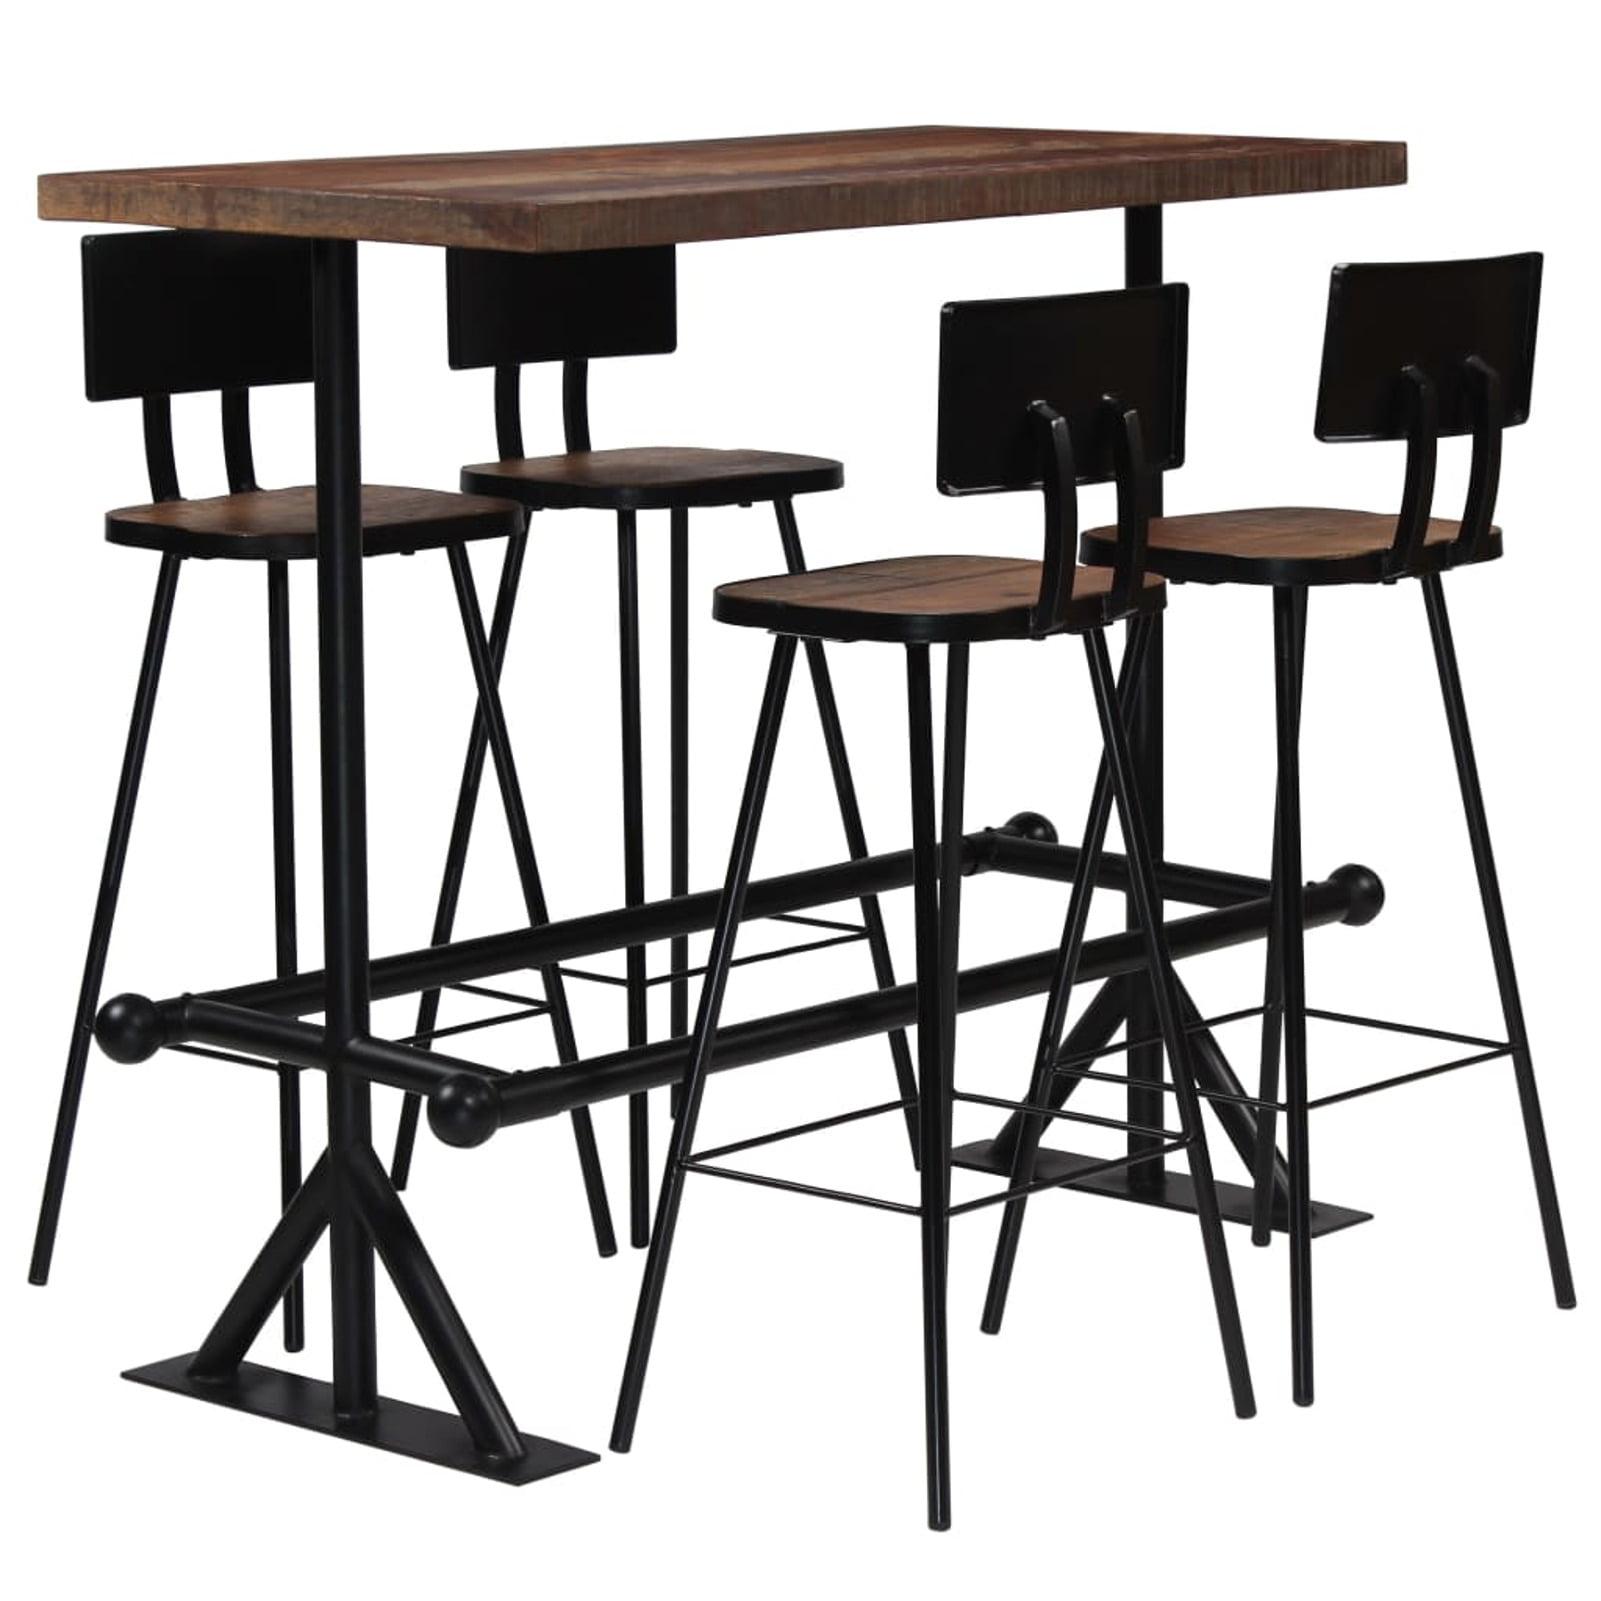 Retro Industrial 5-Piece Bar Set with Reclaimed Wood & Steel Frame